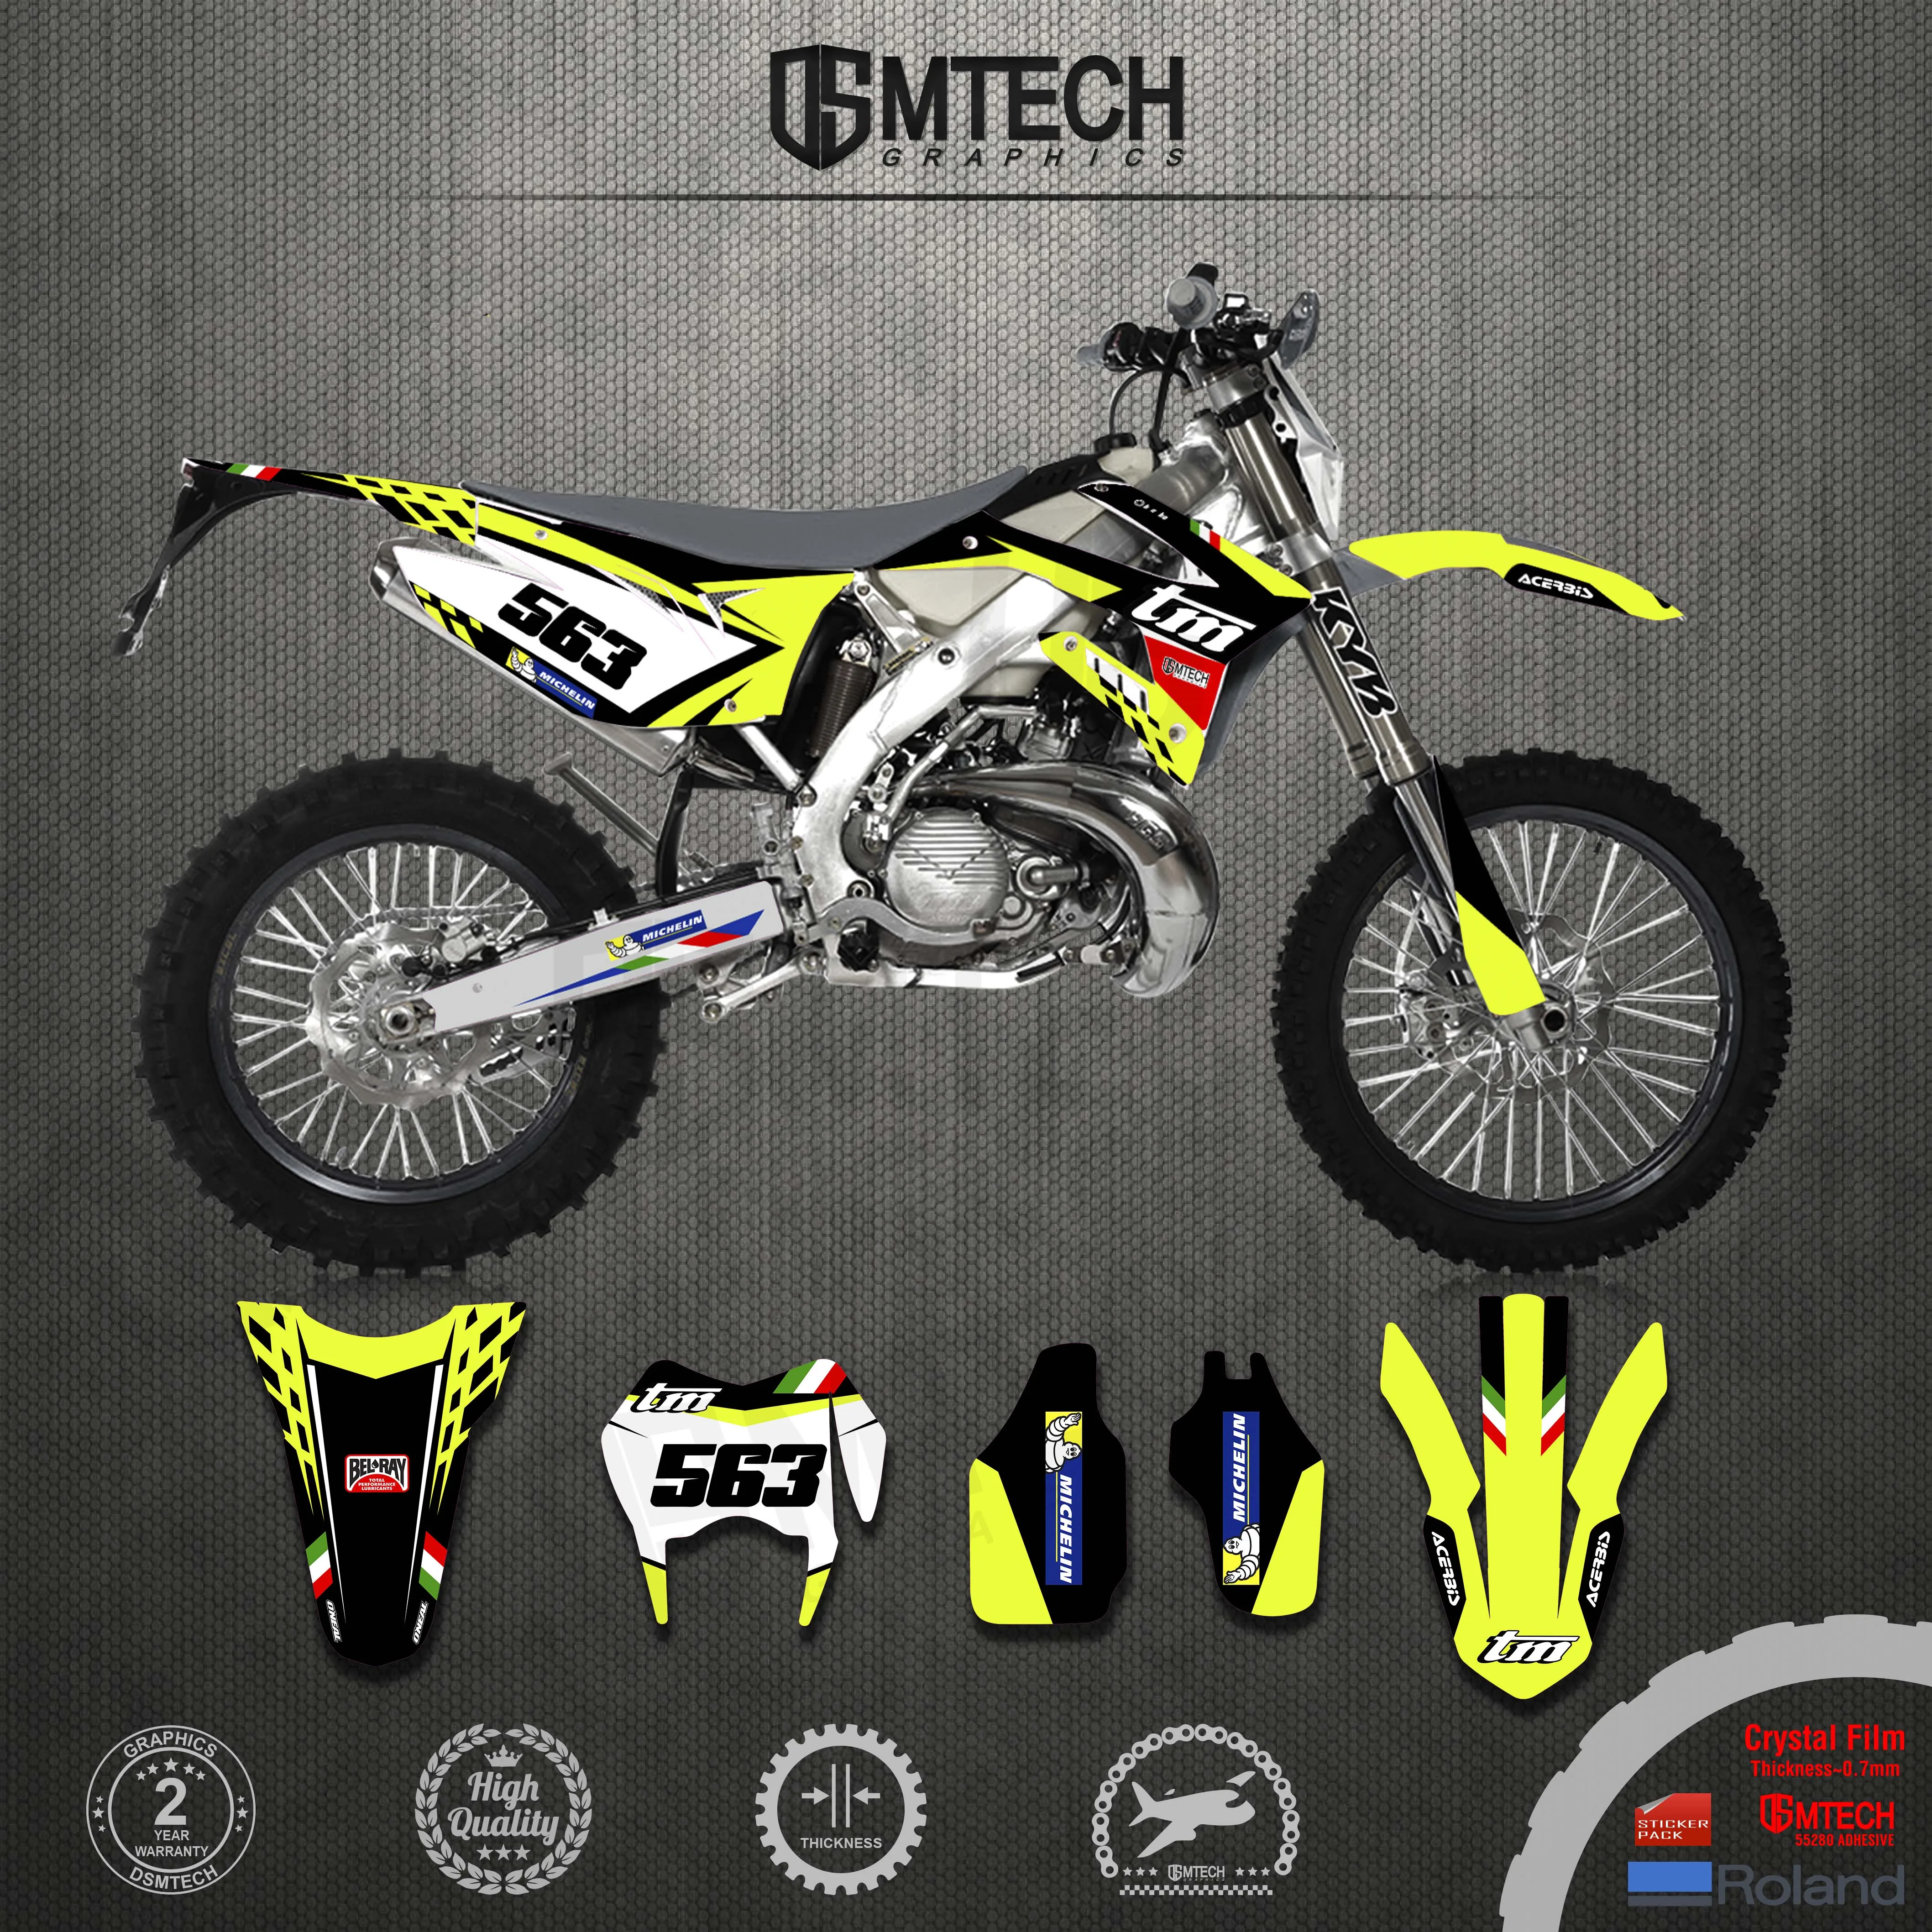 DSMTECH Motorcycle Decal Sticker Background Graphics Combination for TM RACING  2015 2016 2017 2018 2019 2020 2021 2015-21